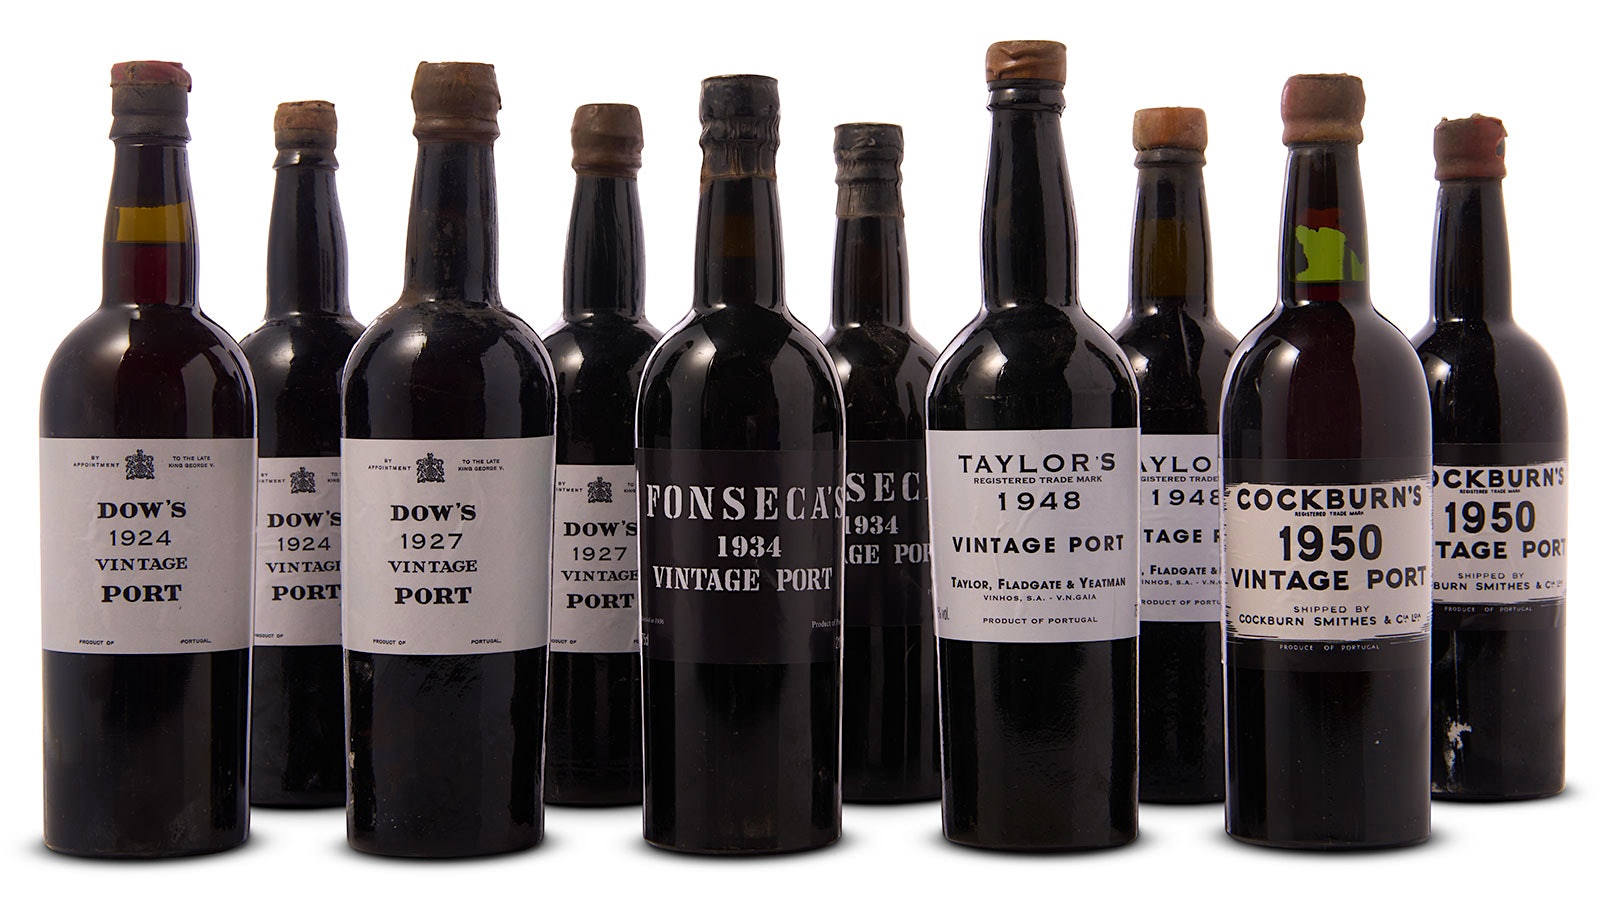  Bottles of Vintage Port wine from Dow, Fonseca, Cockburn and Taylor Fladgate, including the 1927 and 1948 vintages